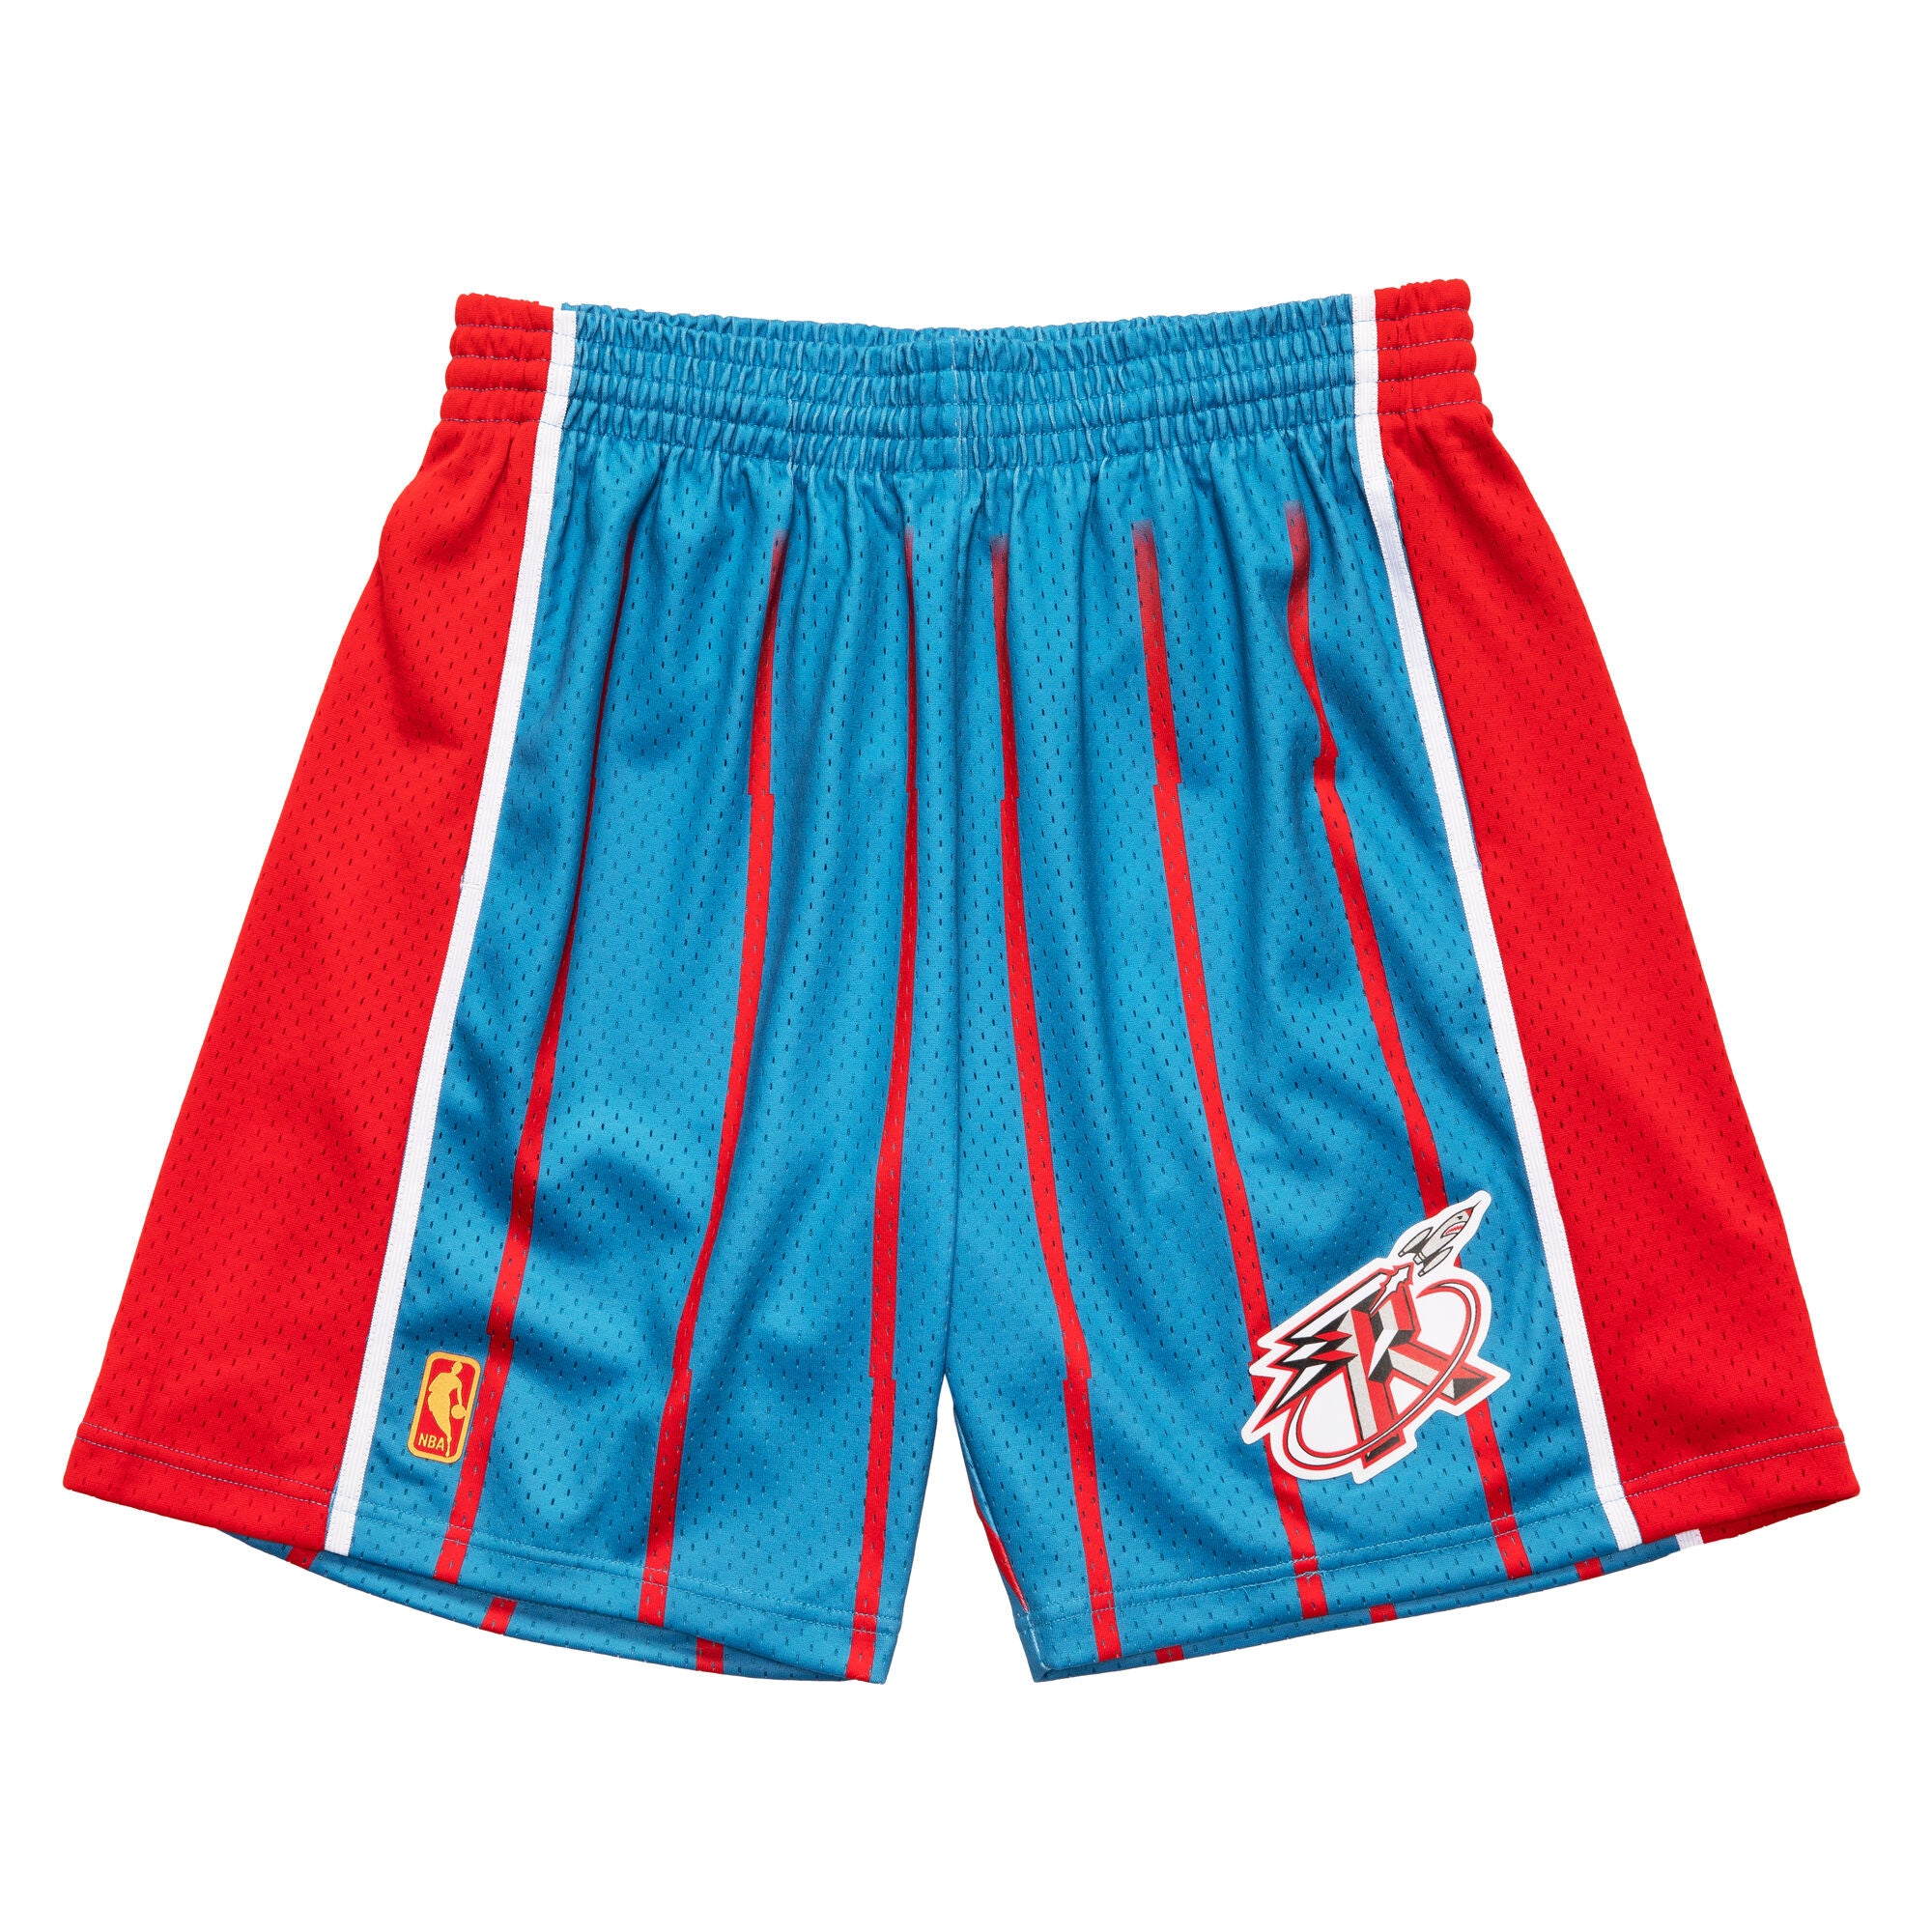 Mitchell & Ness NBA Swingman Shorts Vancouver Grizzlies Road 1996-97 Blue -  teal